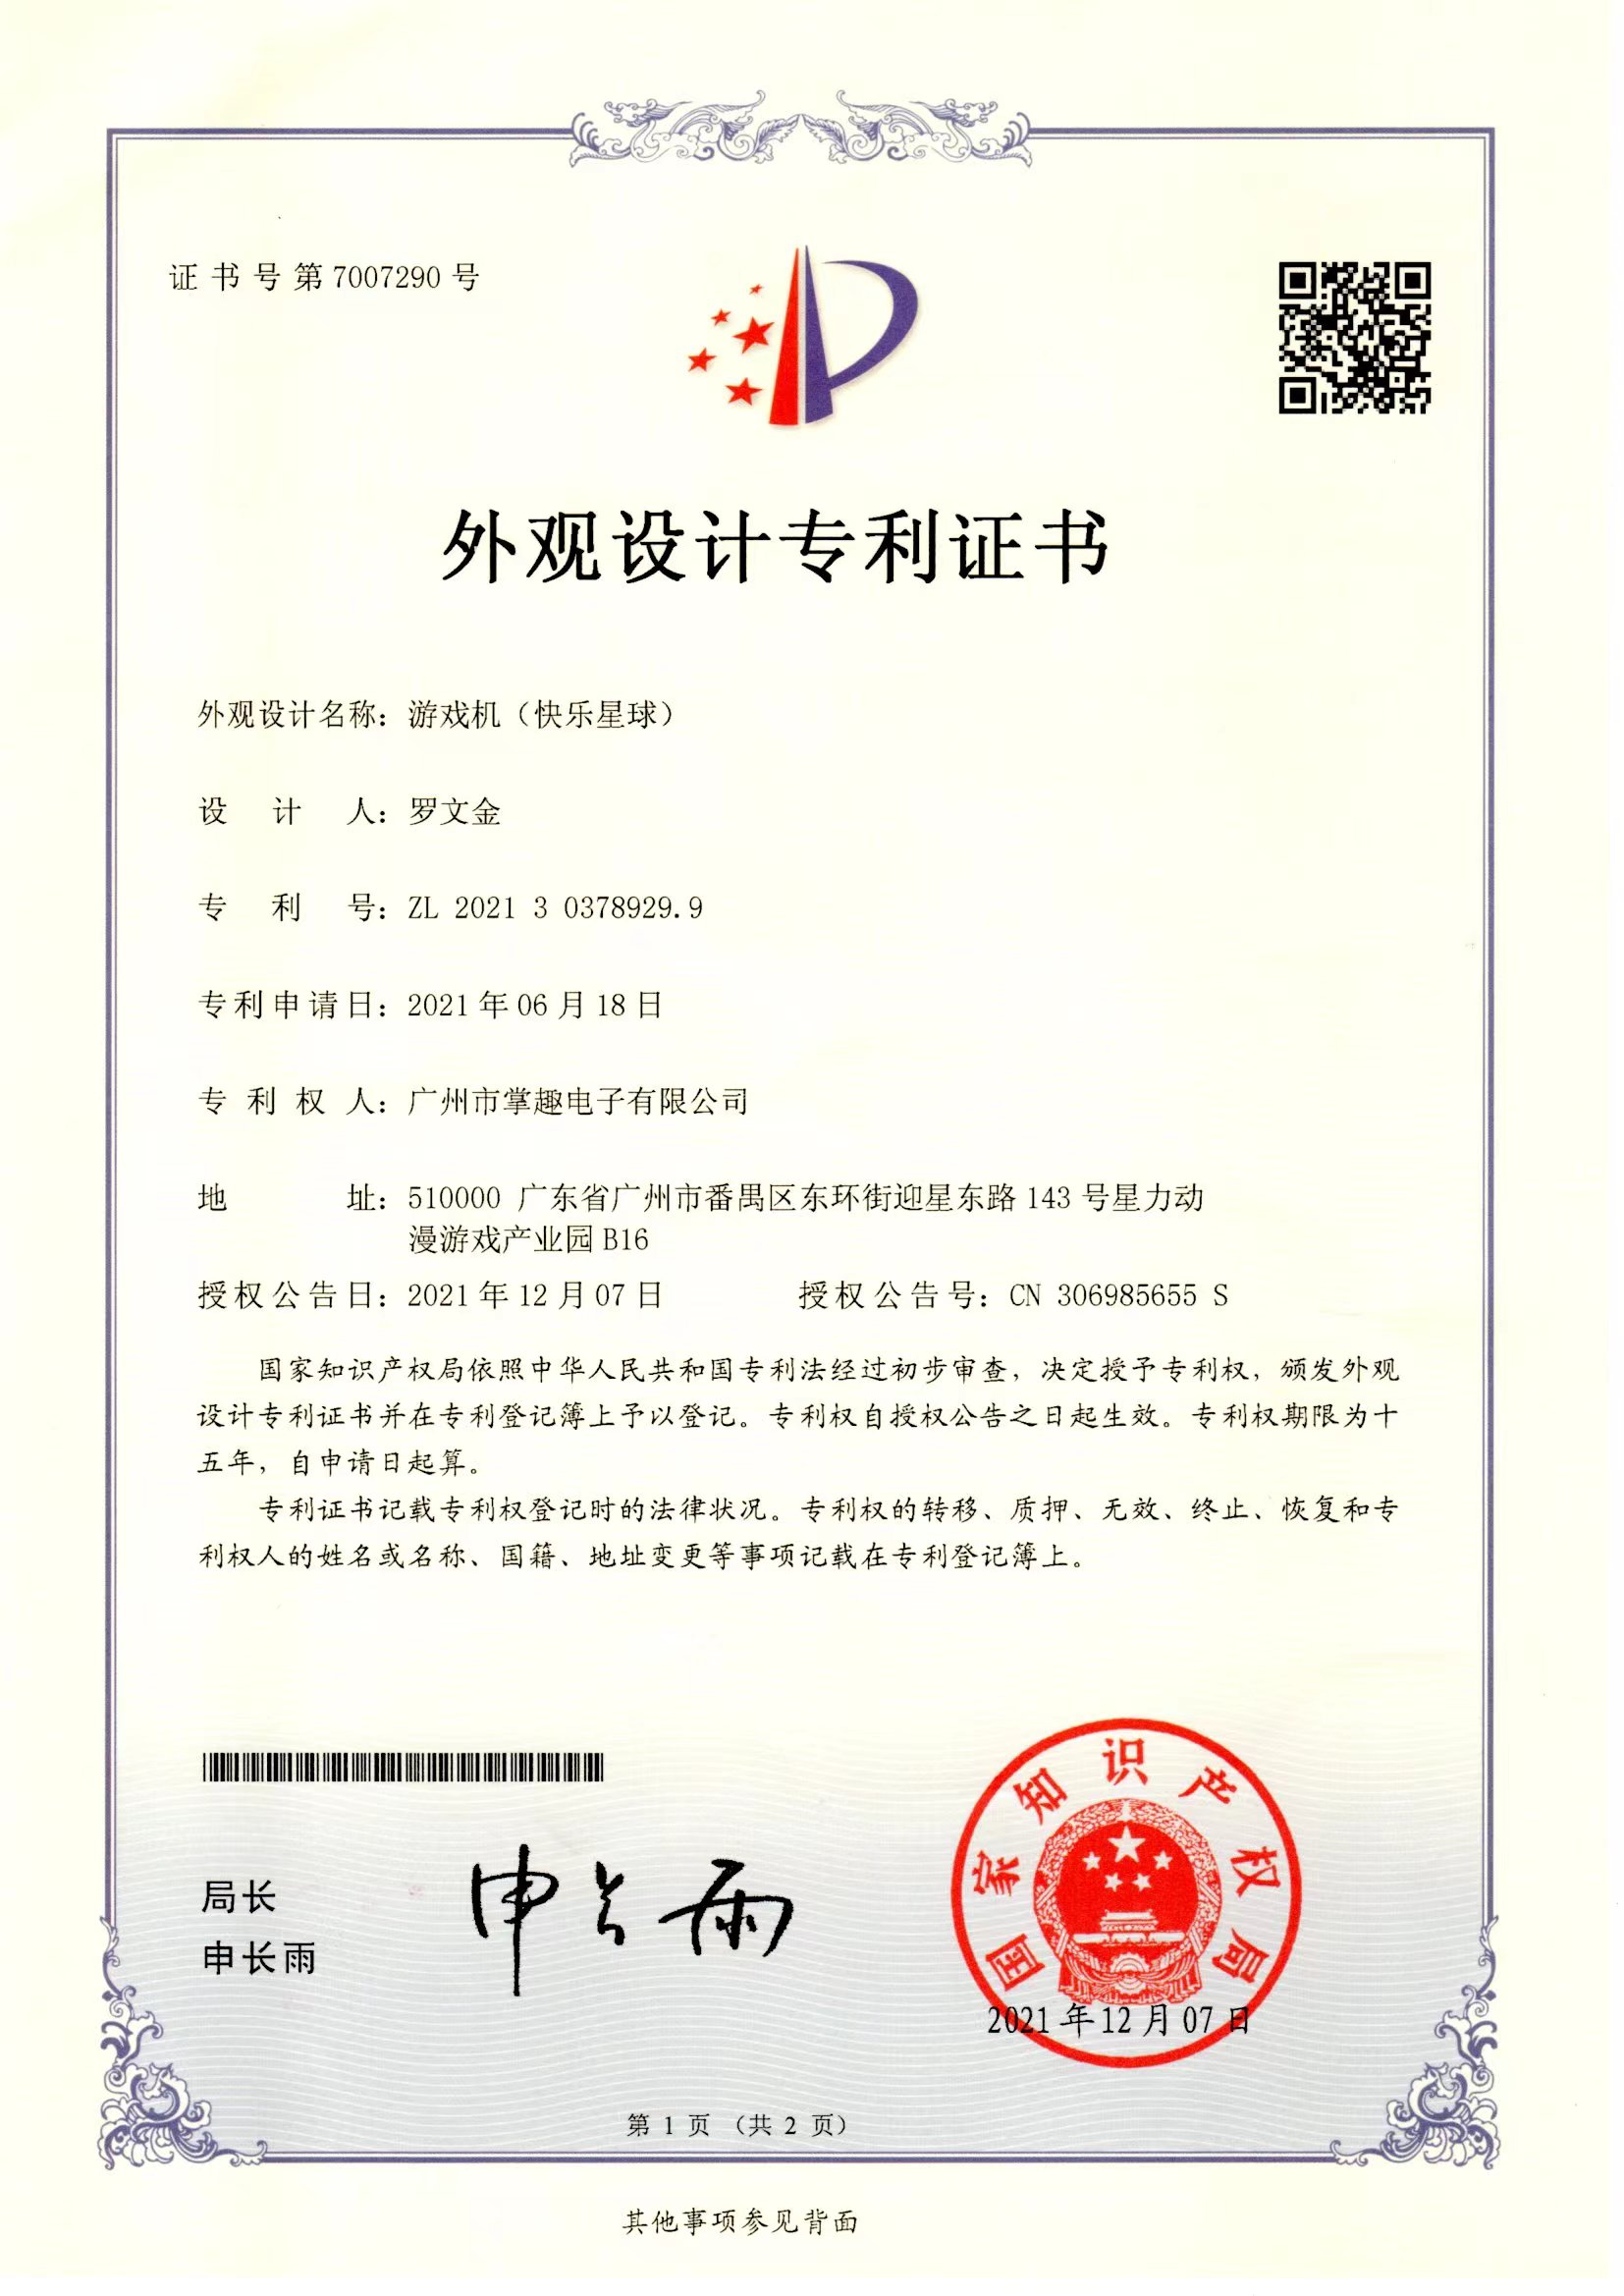 Planet Roll patent certificate  2